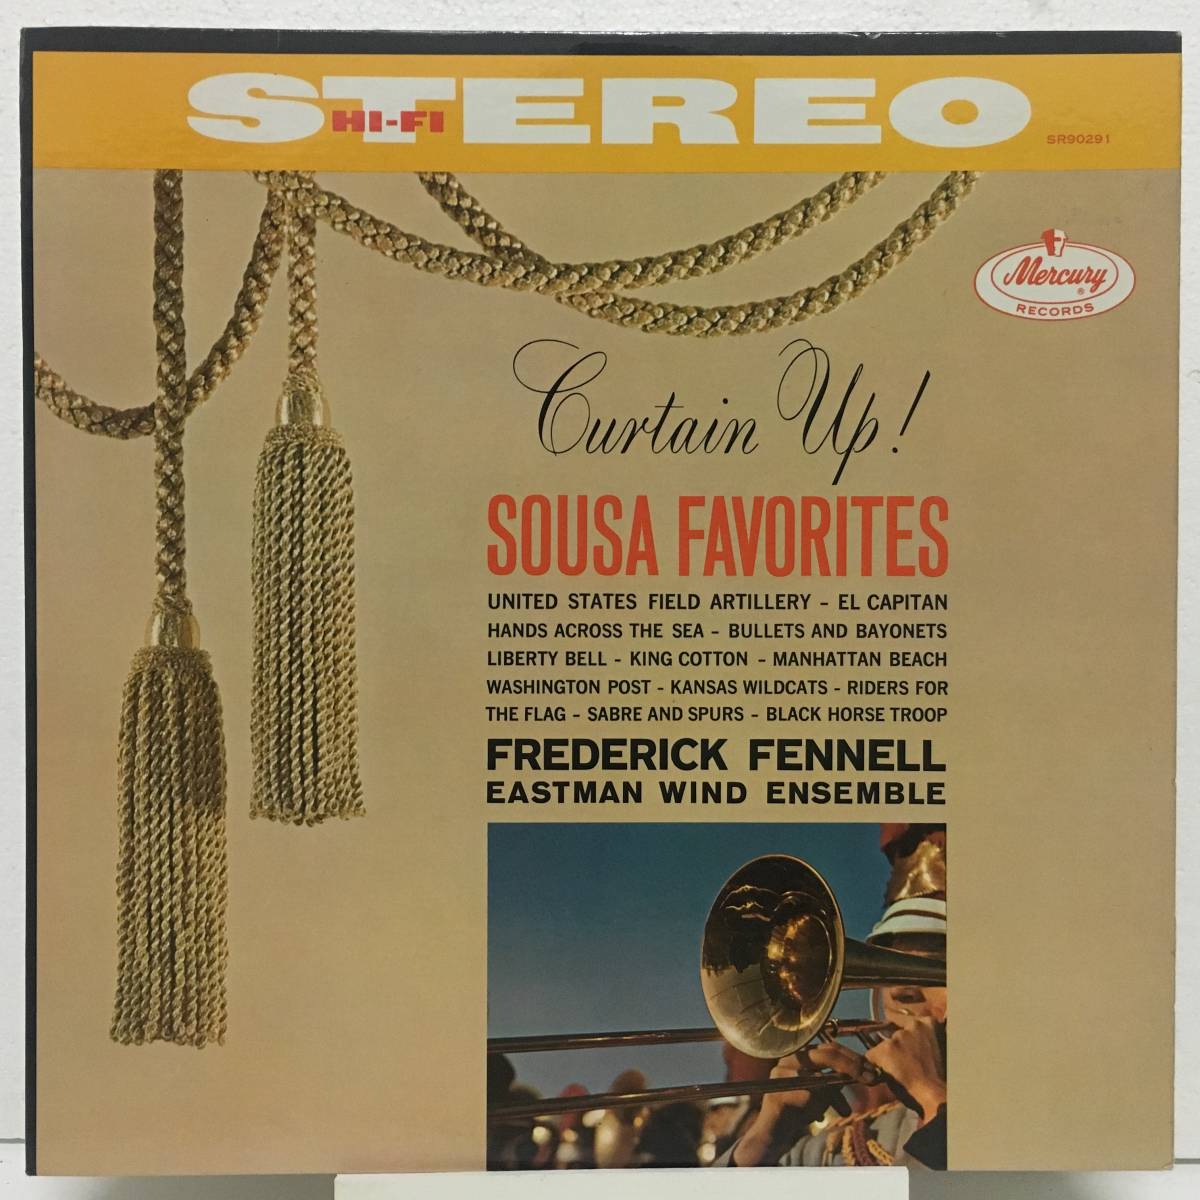 *CURTAIN UP! / SOUSA FAVORITES / FREDERICK FENNELL * MERCURY rice deep groove 